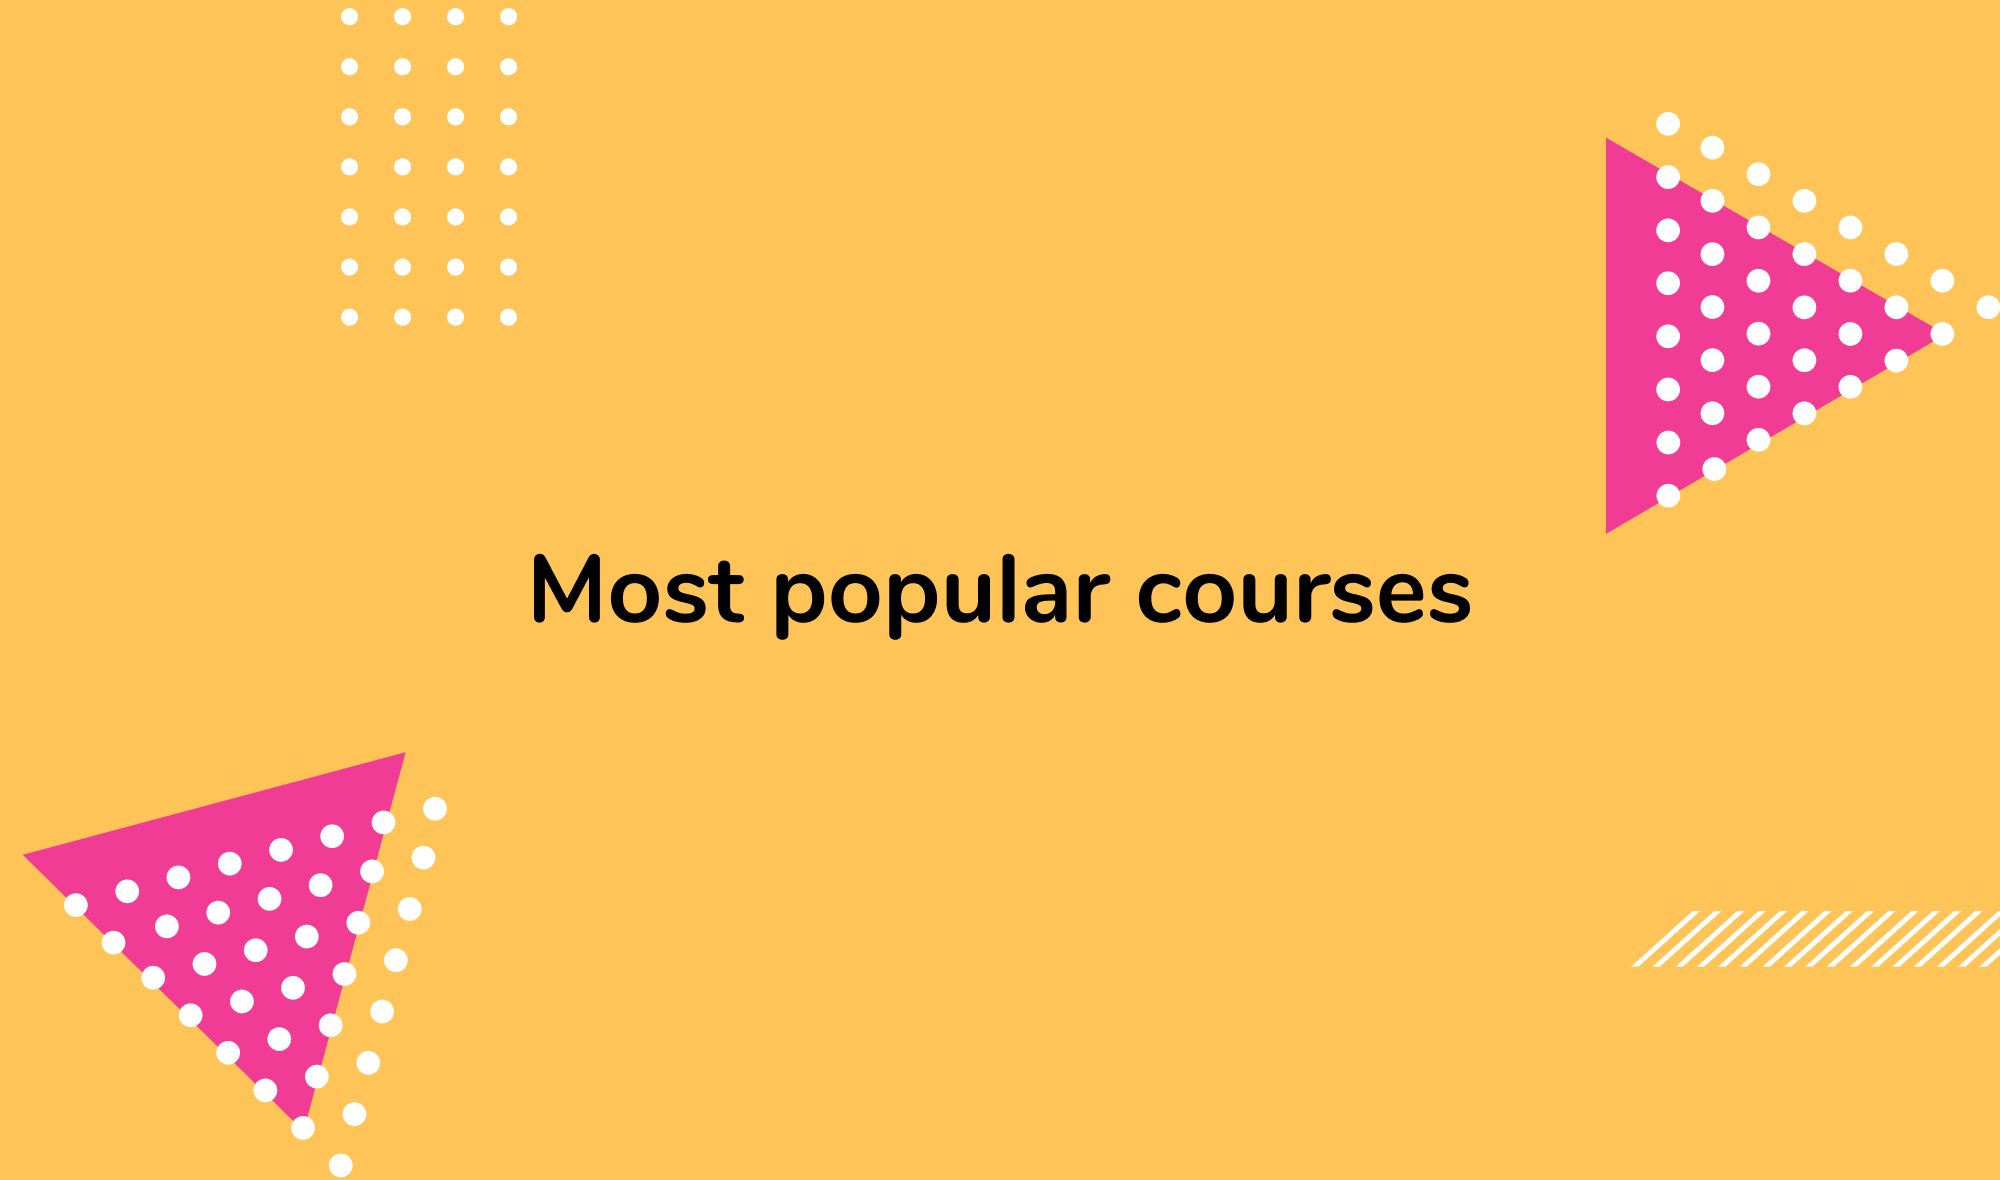 Most popular courses